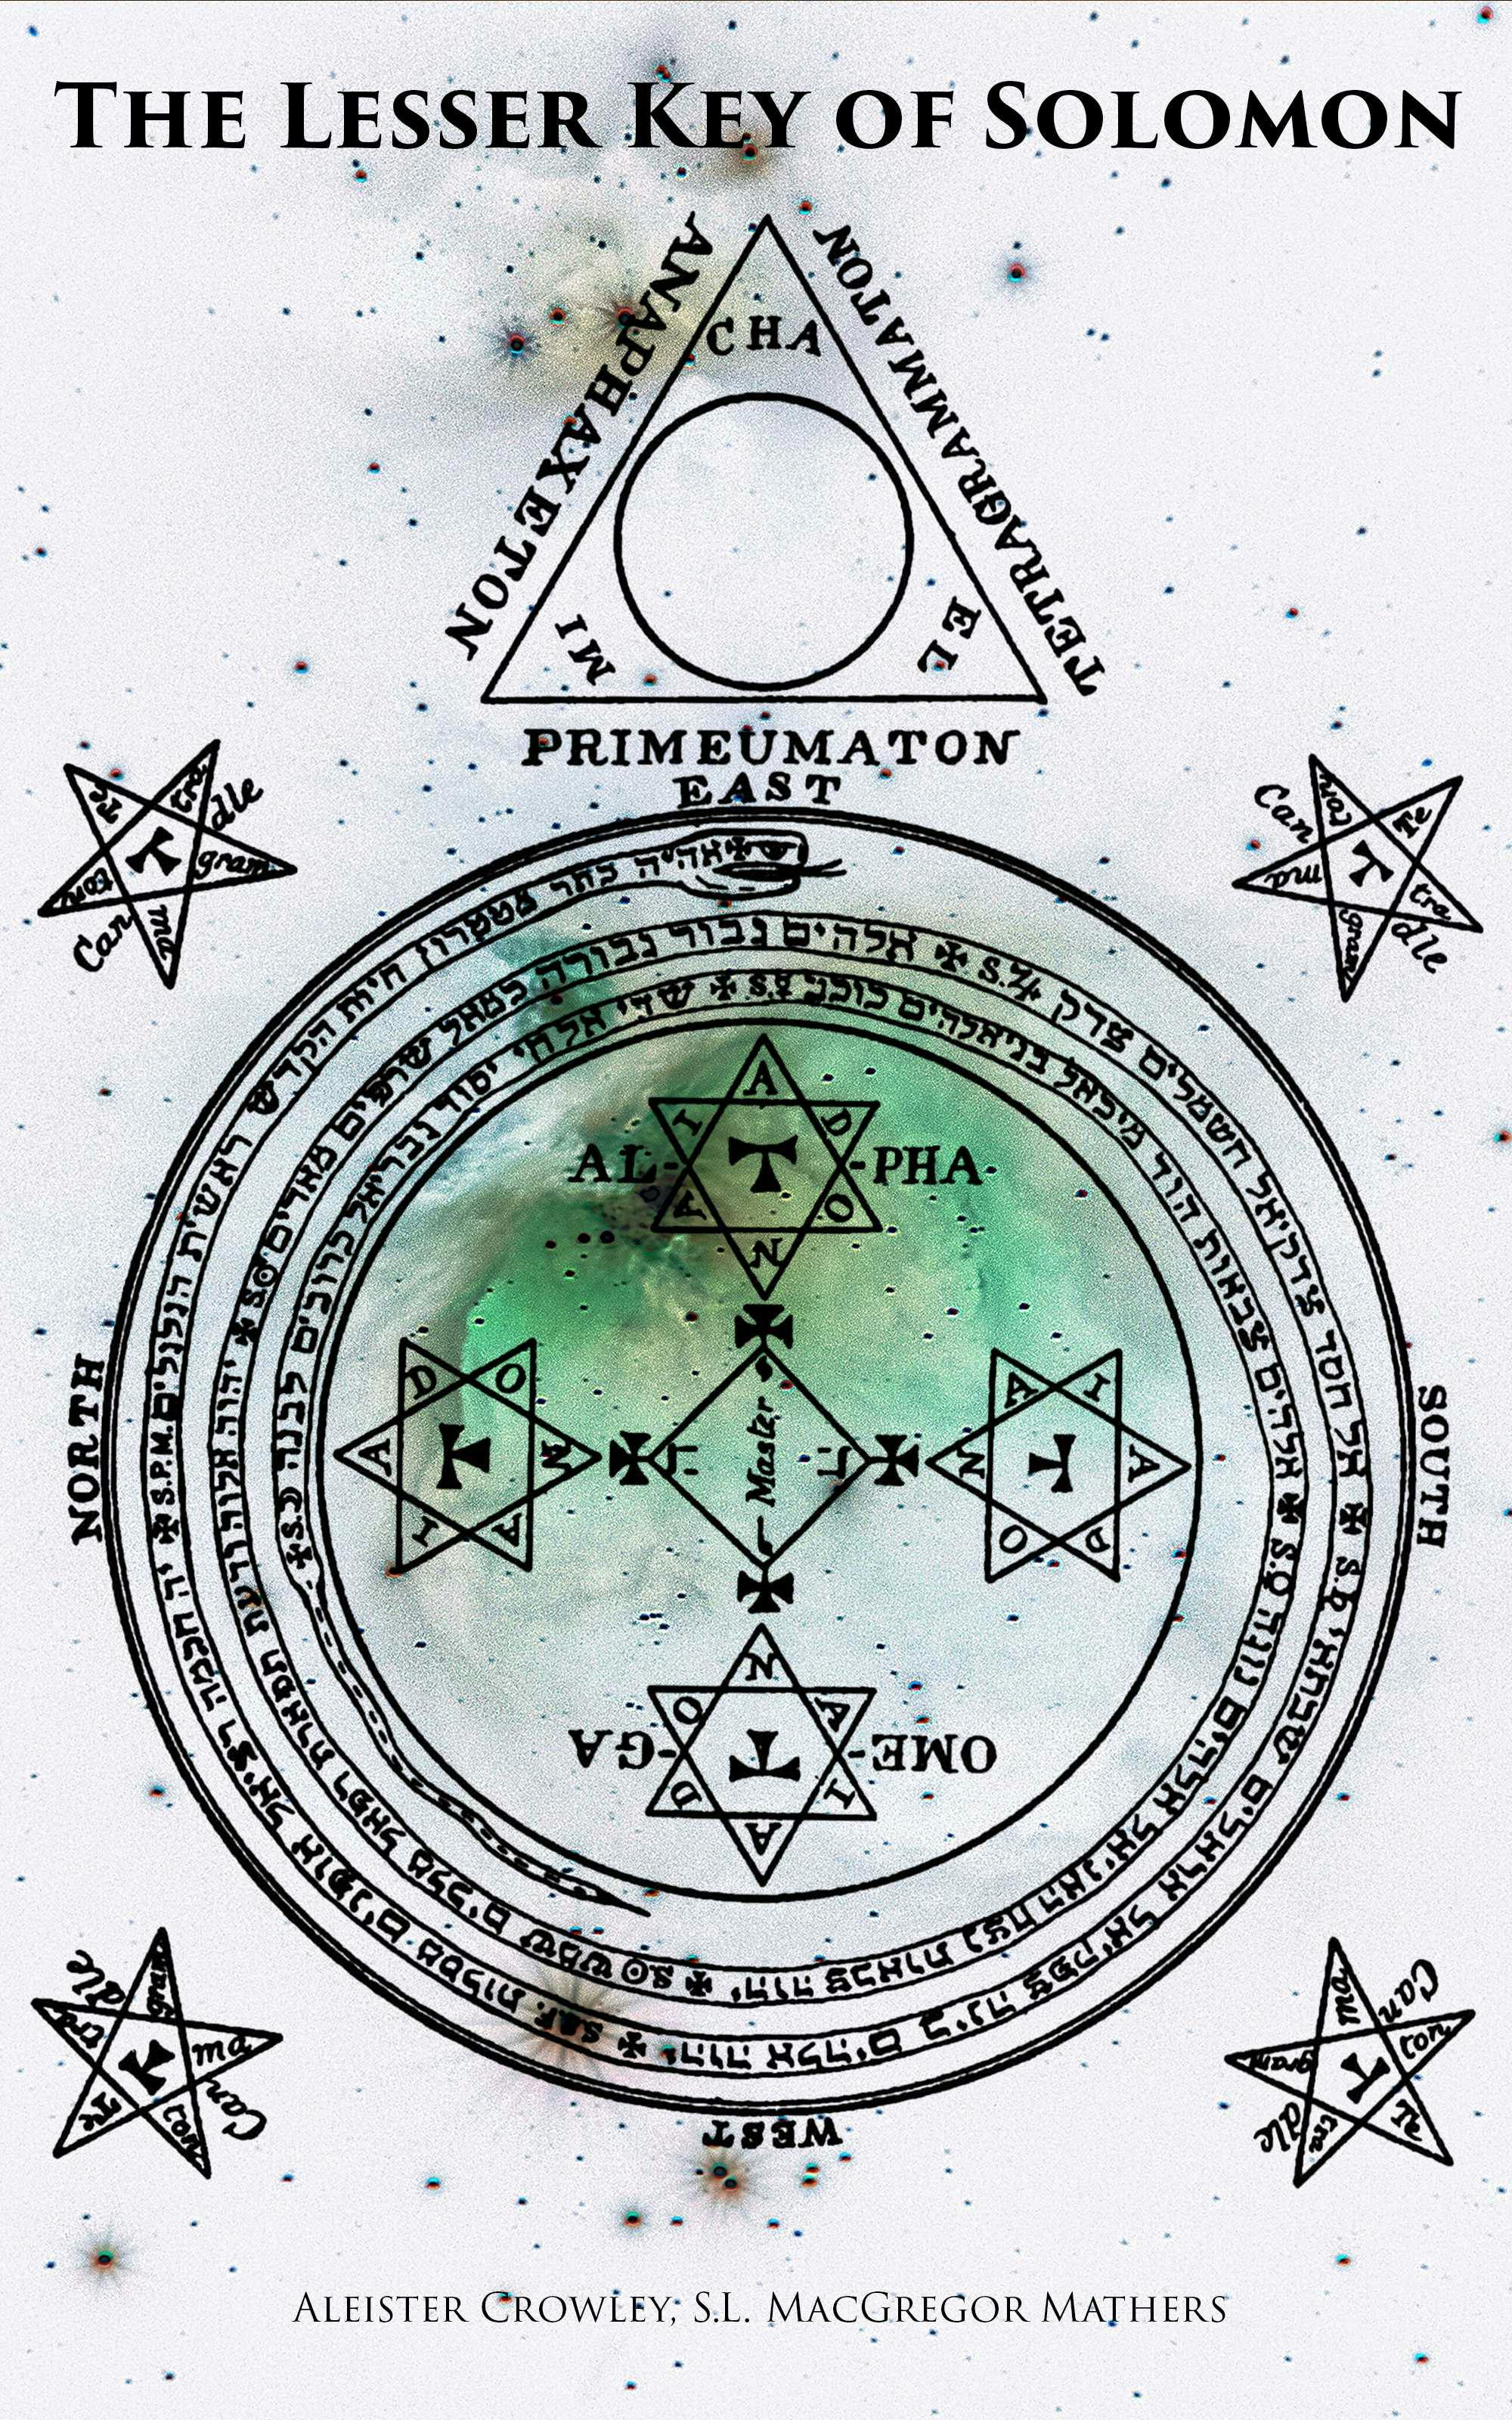 The Lesser Key of Solomon - S.L. MacGregor Mathers, Aleister Crowley